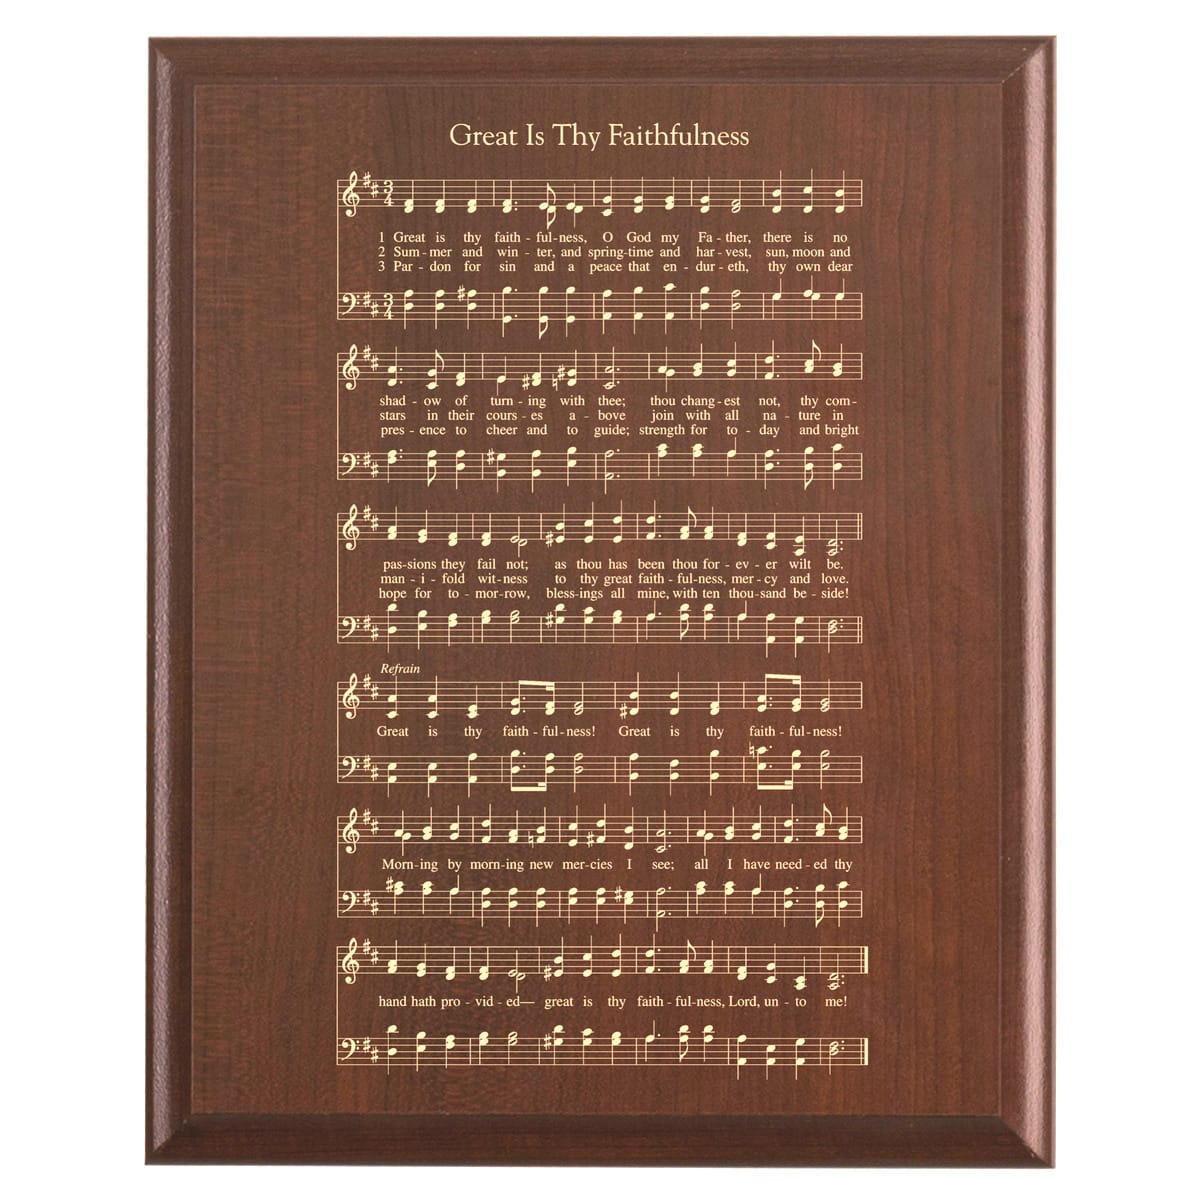 Plaque photo: Great Is Thy Faithfulness Hymn Plaque design with free personalization. Wood style finish with customized text.